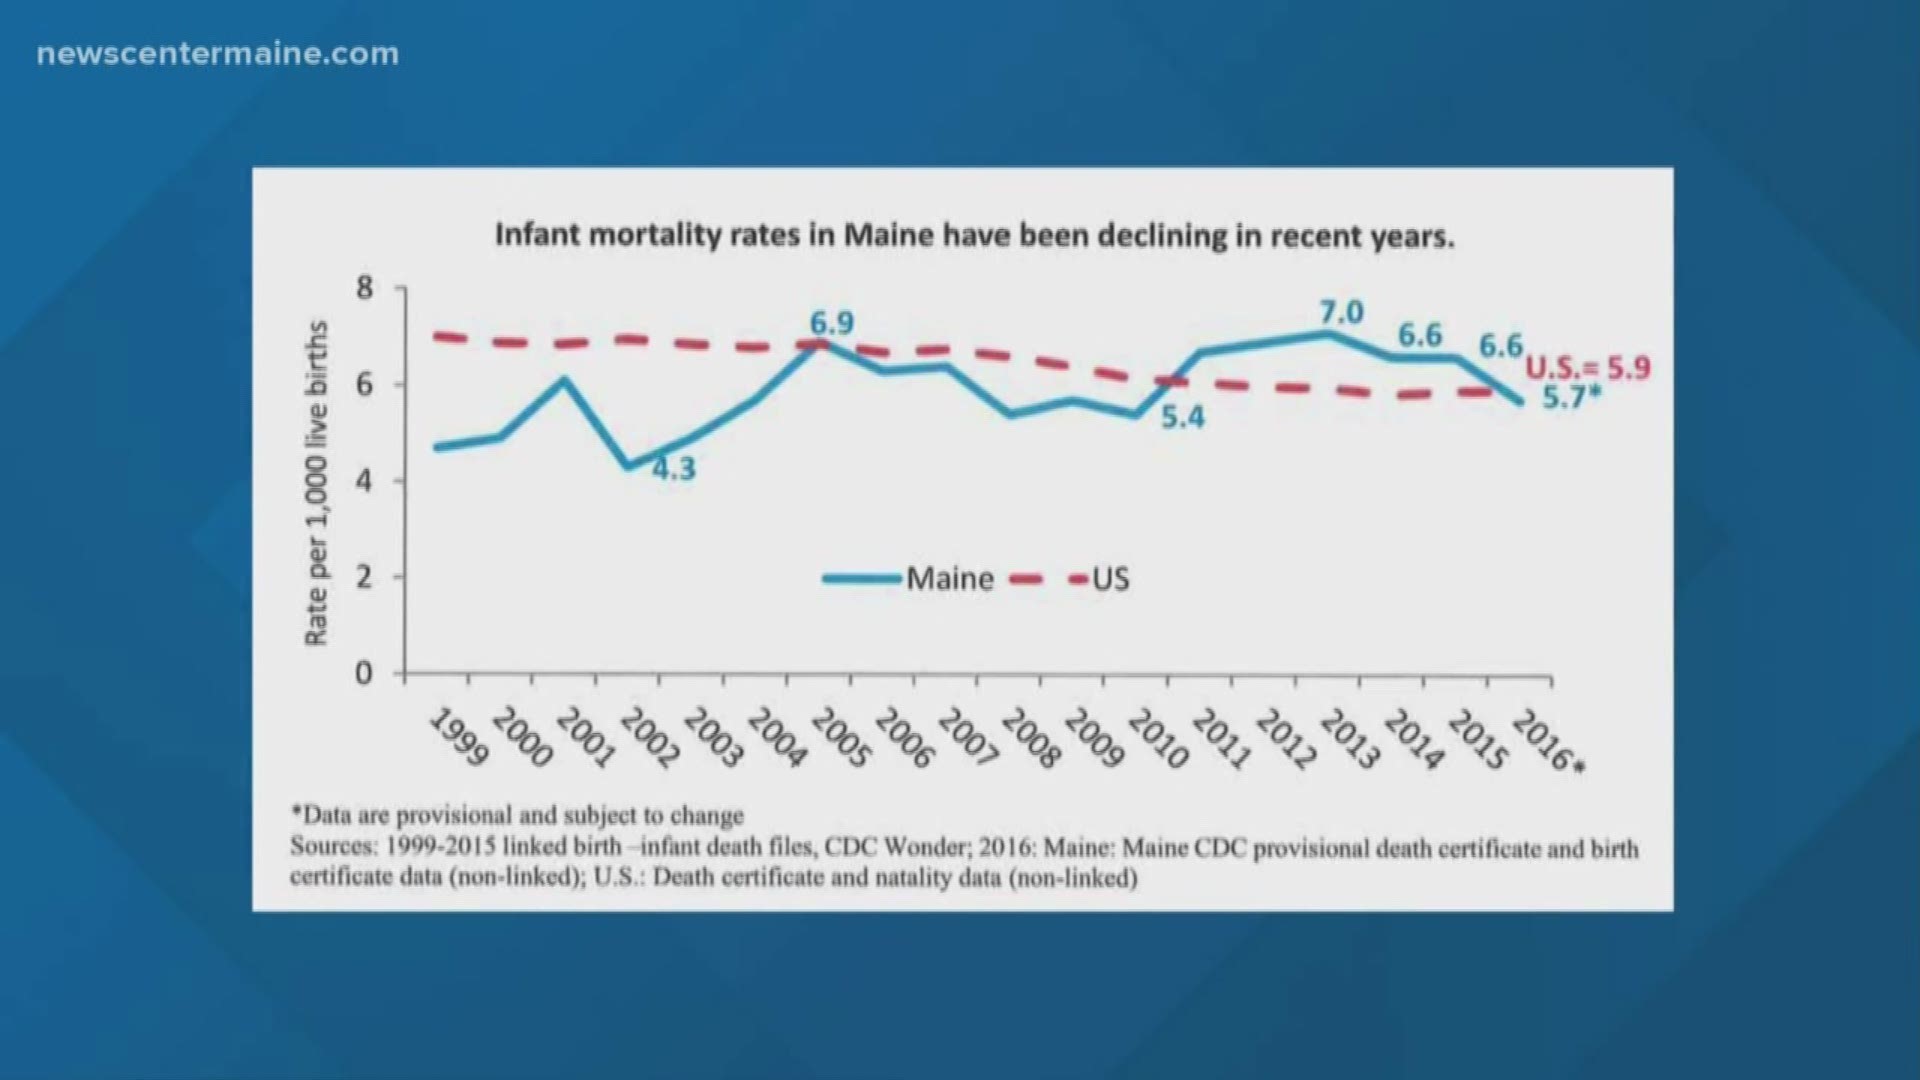 Infant mortality rates in Maine